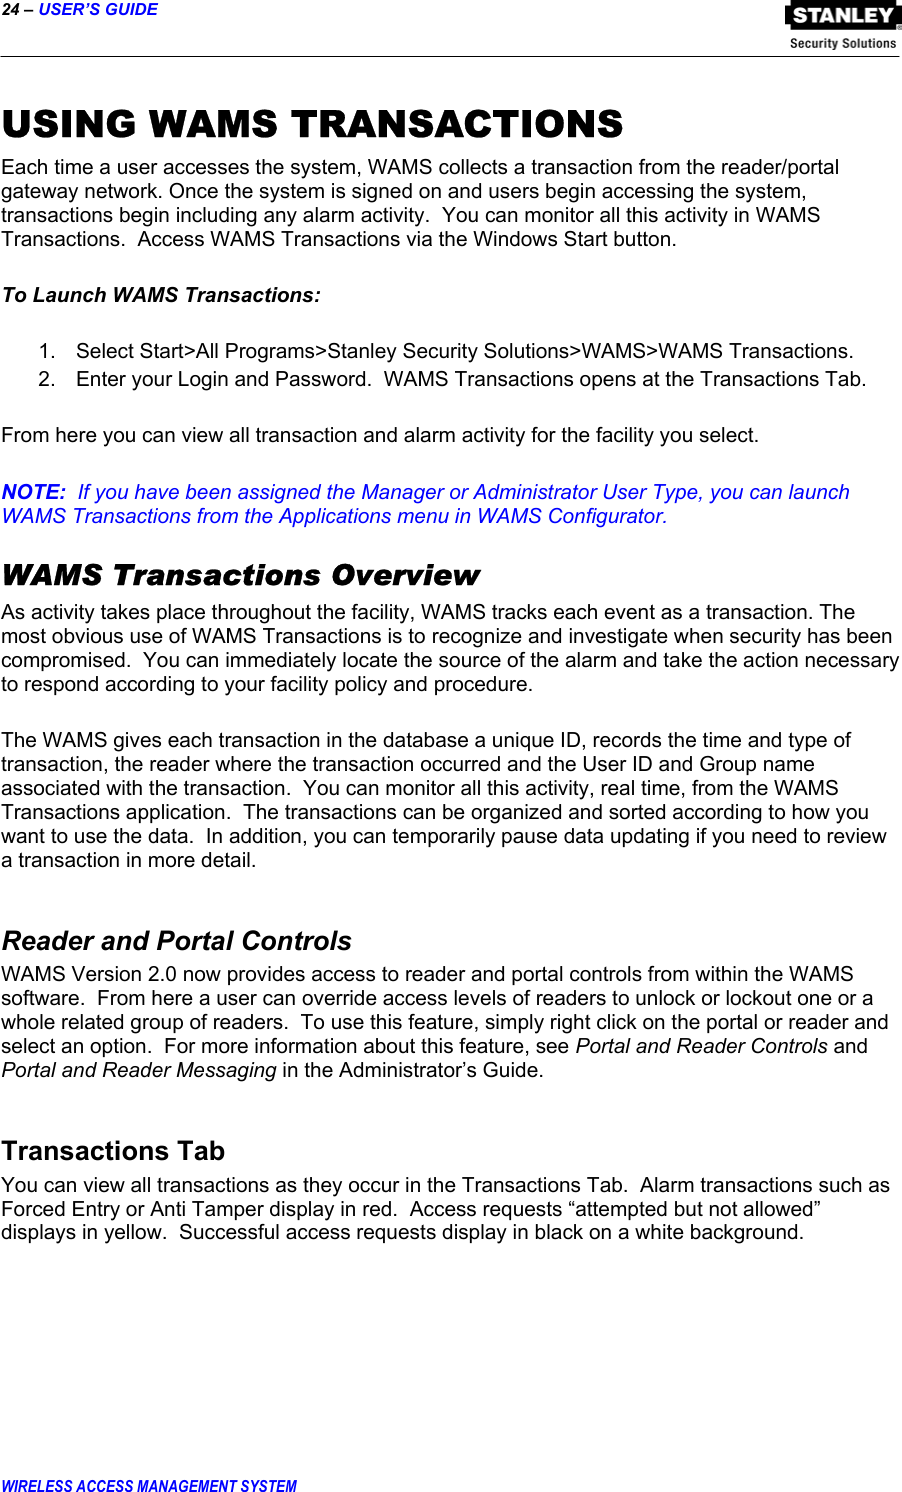 24 – USER’S GUIDE  WIRELESS ACCESS MANAGEMENT SYSTEM USING WAMS TRANSACTIONS Each time a user accesses the system, WAMS collects a transaction from the reader/portal gateway network. Once the system is signed on and users begin accessing the system, transactions begin including any alarm activity.  You can monitor all this activity in WAMS Transactions.  Access WAMS Transactions via the Windows Start button.  To Launch WAMS Transactions:  1.  Select Start&gt;All Programs&gt;Stanley Security Solutions&gt;WAMS&gt;WAMS Transactions.   2.  Enter your Login and Password.  WAMS Transactions opens at the Transactions Tab.  From here you can view all transaction and alarm activity for the facility you select.  NOTE:  If you have been assigned the Manager or Administrator User Type, you can launch WAMS Transactions from the Applications menu in WAMS Configurator. WAMS Transactions Overview As activity takes place throughout the facility, WAMS tracks each event as a transaction. The most obvious use of WAMS Transactions is to recognize and investigate when security has been compromised.  You can immediately locate the source of the alarm and take the action necessary to respond according to your facility policy and procedure.    The WAMS gives each transaction in the database a unique ID, records the time and type of transaction, the reader where the transaction occurred and the User ID and Group name associated with the transaction.  You can monitor all this activity, real time, from the WAMS Transactions application.  The transactions can be organized and sorted according to how you want to use the data.  In addition, you can temporarily pause data updating if you need to review a transaction in more detail.   Reader and Portal Controls WAMS Version 2.0 now provides access to reader and portal controls from within the WAMS software.  From here a user can override access levels of readers to unlock or lockout one or a whole related group of readers.  To use this feature, simply right click on the portal or reader and select an option.  For more information about this feature, see Portal and Reader Controls and Portal and Reader Messaging in the Administrator’s Guide.  Transactions Tab You can view all transactions as they occur in the Transactions Tab.  Alarm transactions such as Forced Entry or Anti Tamper display in red.  Access requests “attempted but not allowed” displays in yellow.  Successful access requests display in black on a white background.    